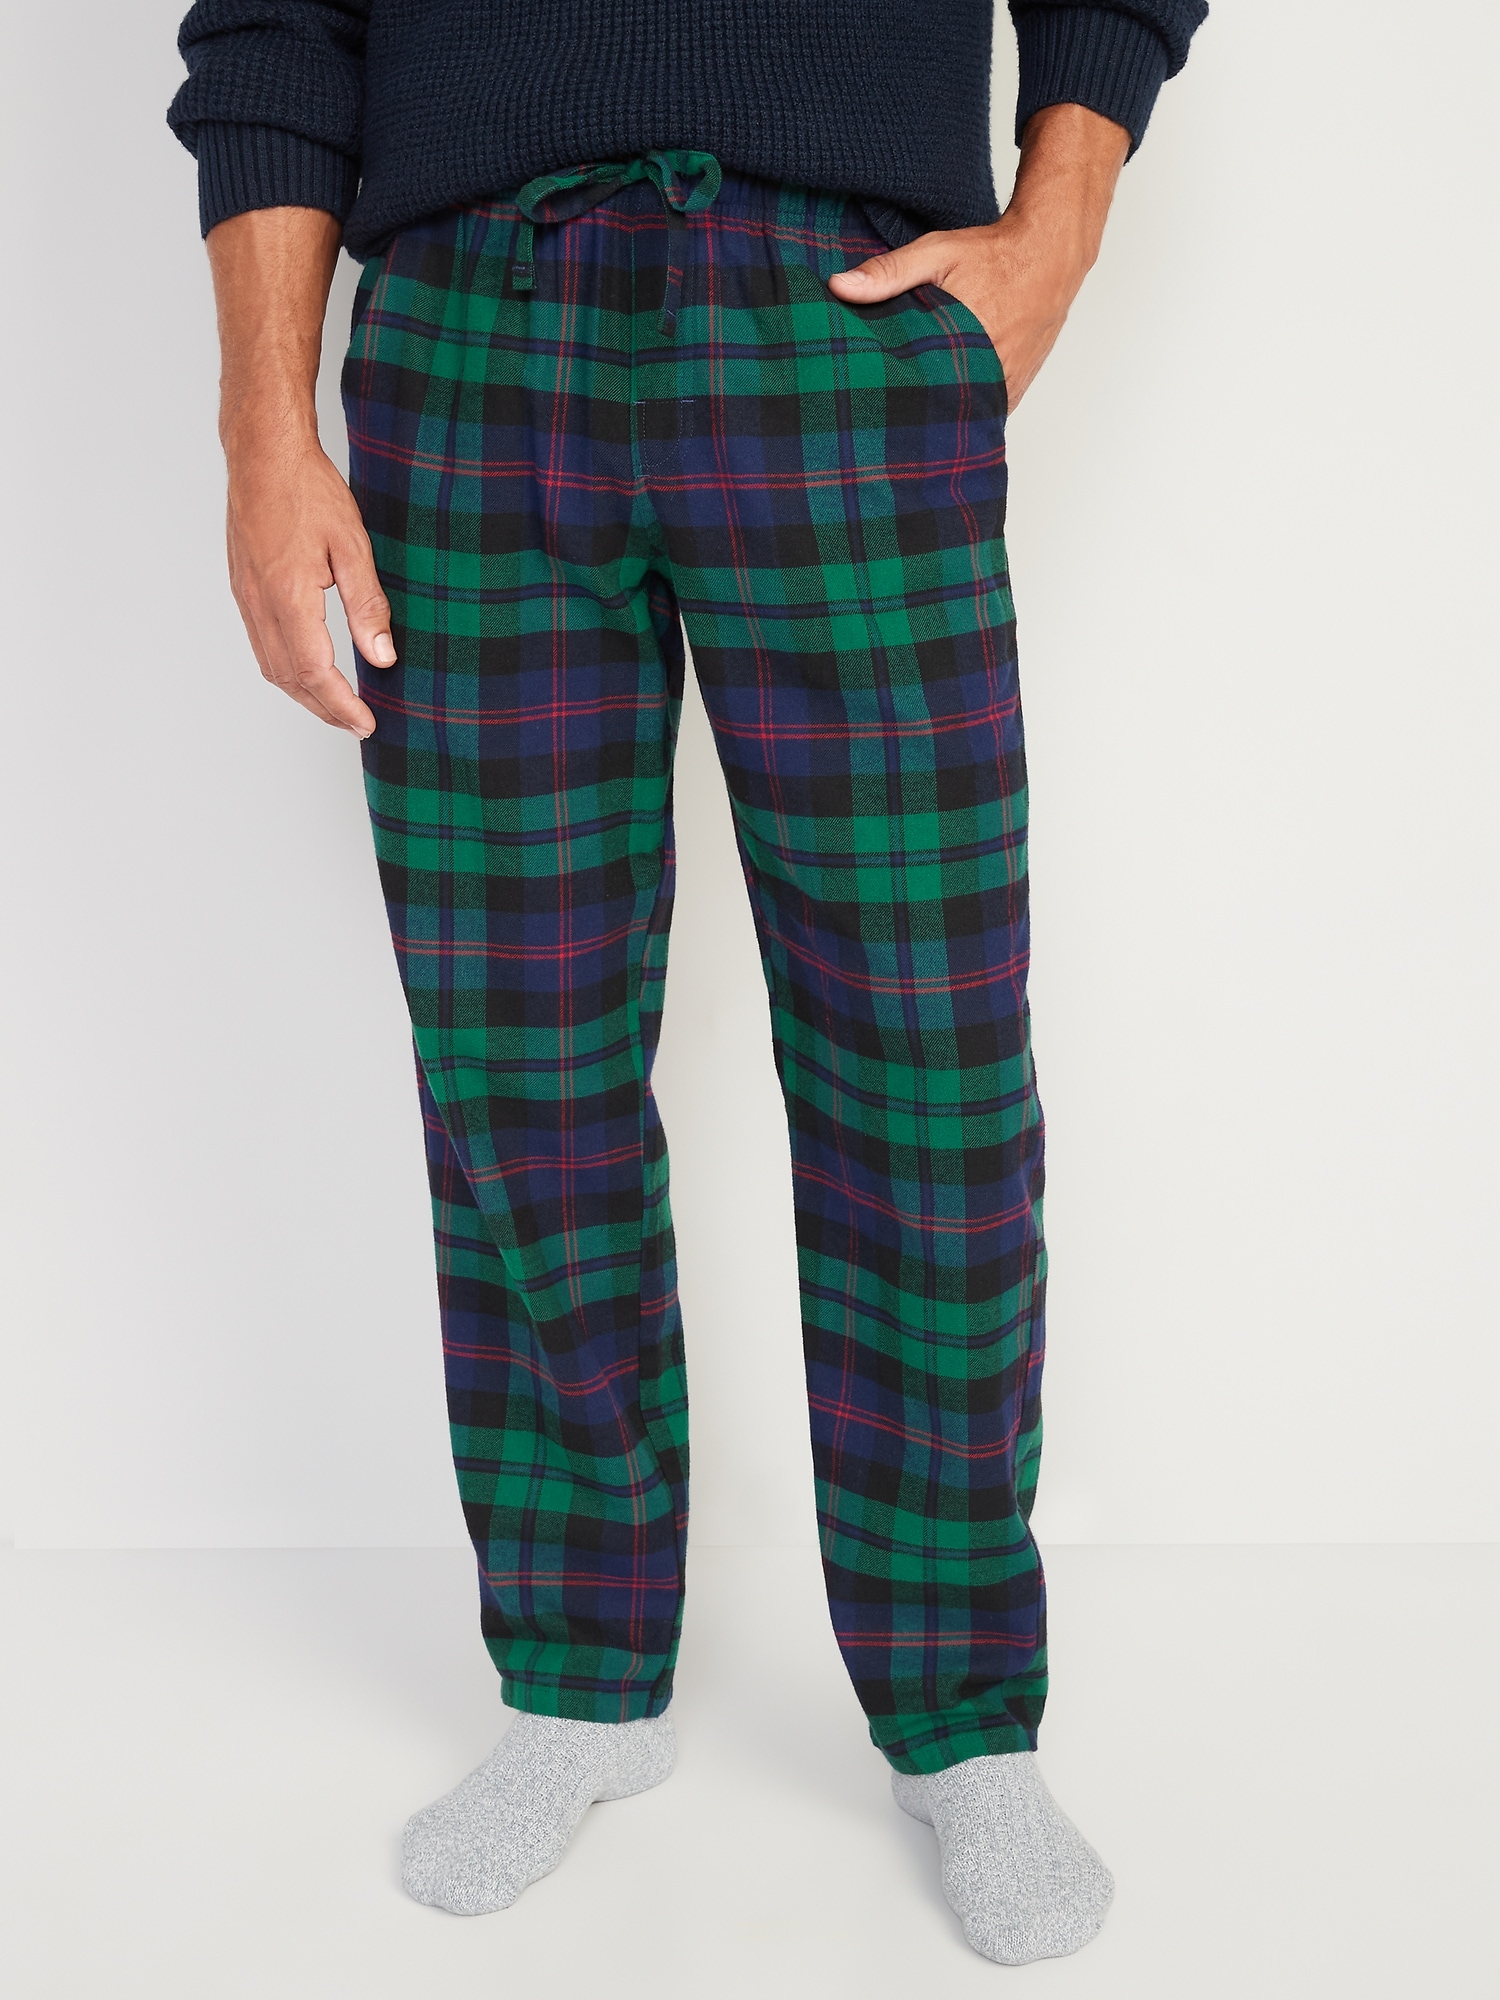 fleece pajama pants old navy - OFF-63% >Free Delivery